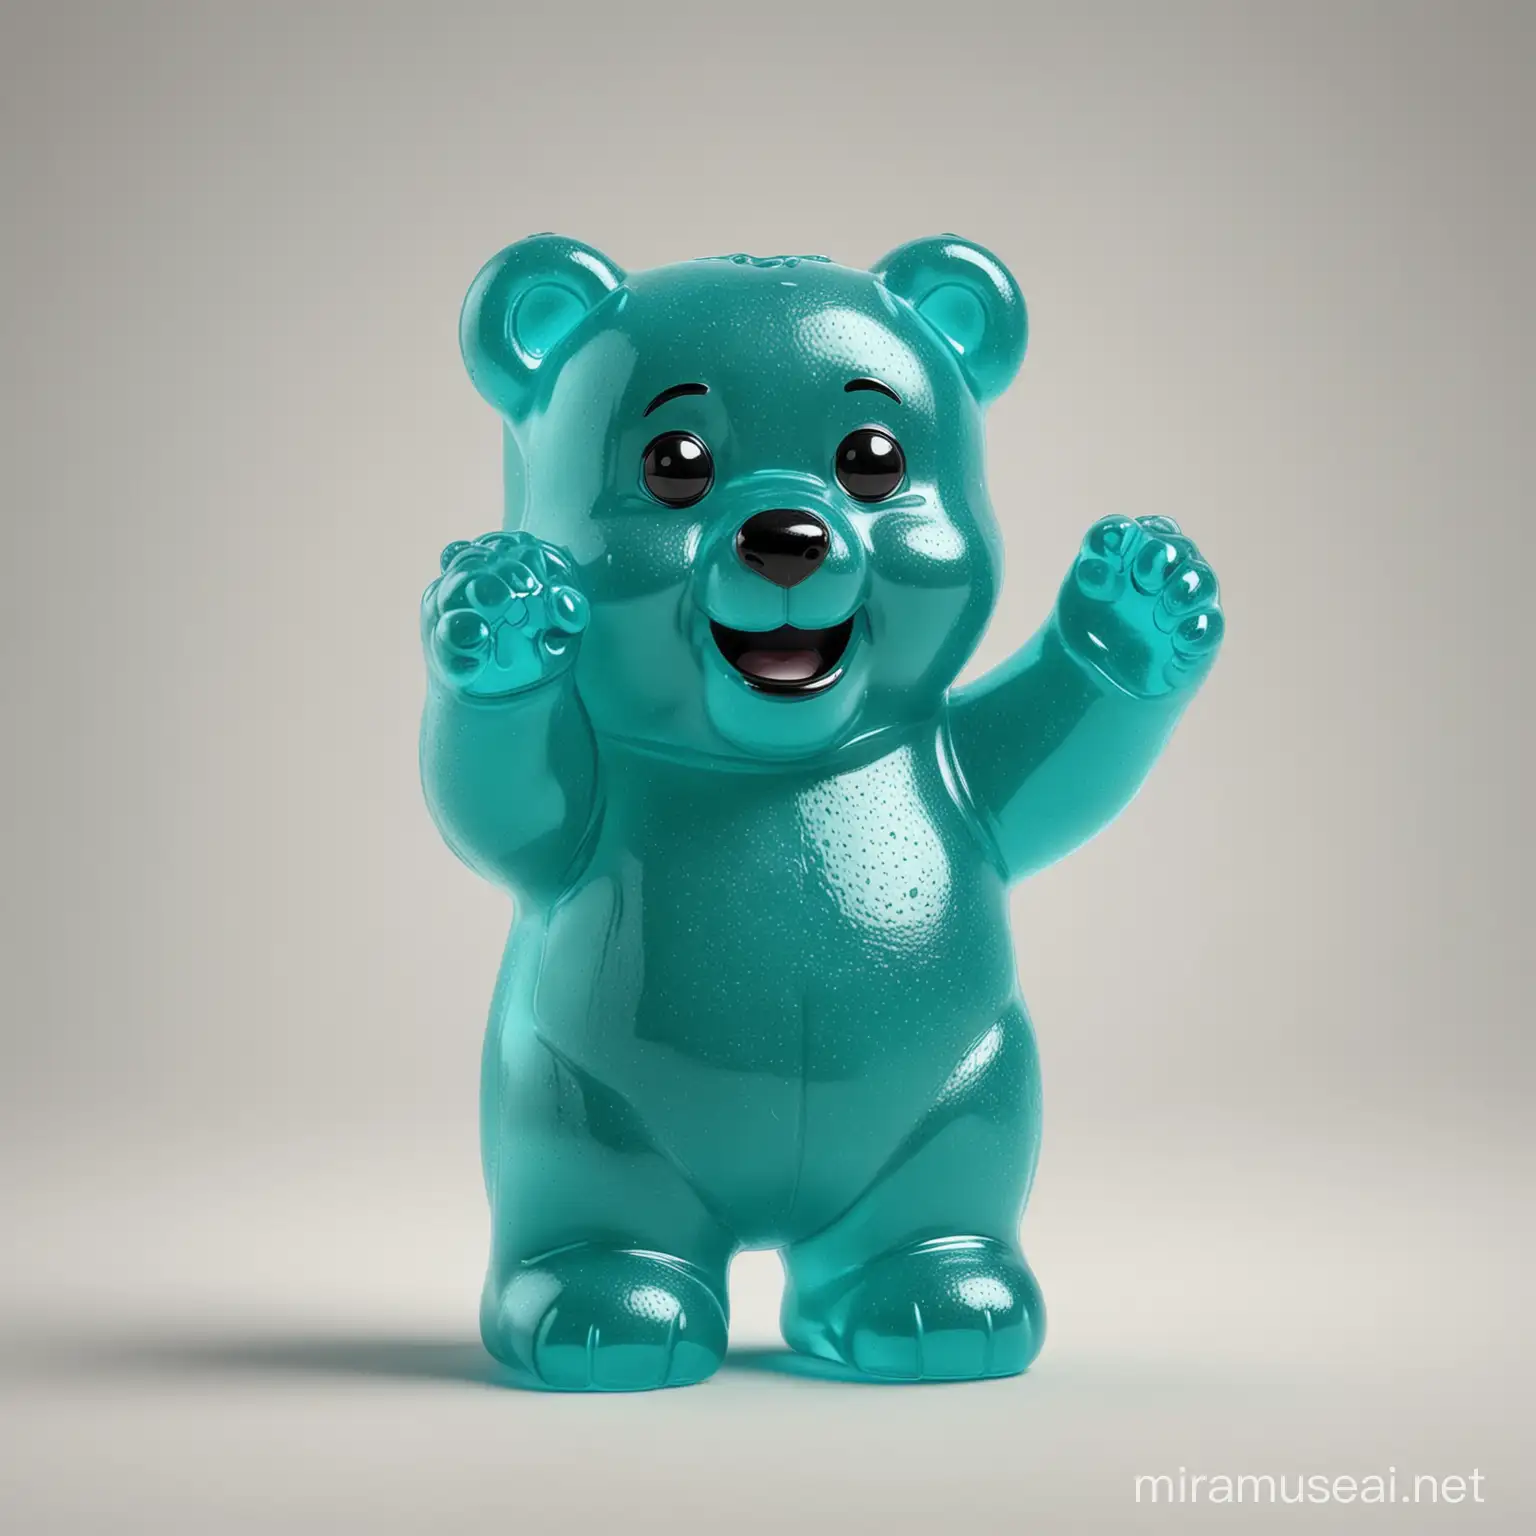 4k Funny turquoise talking gummy bear meme with a neutral background